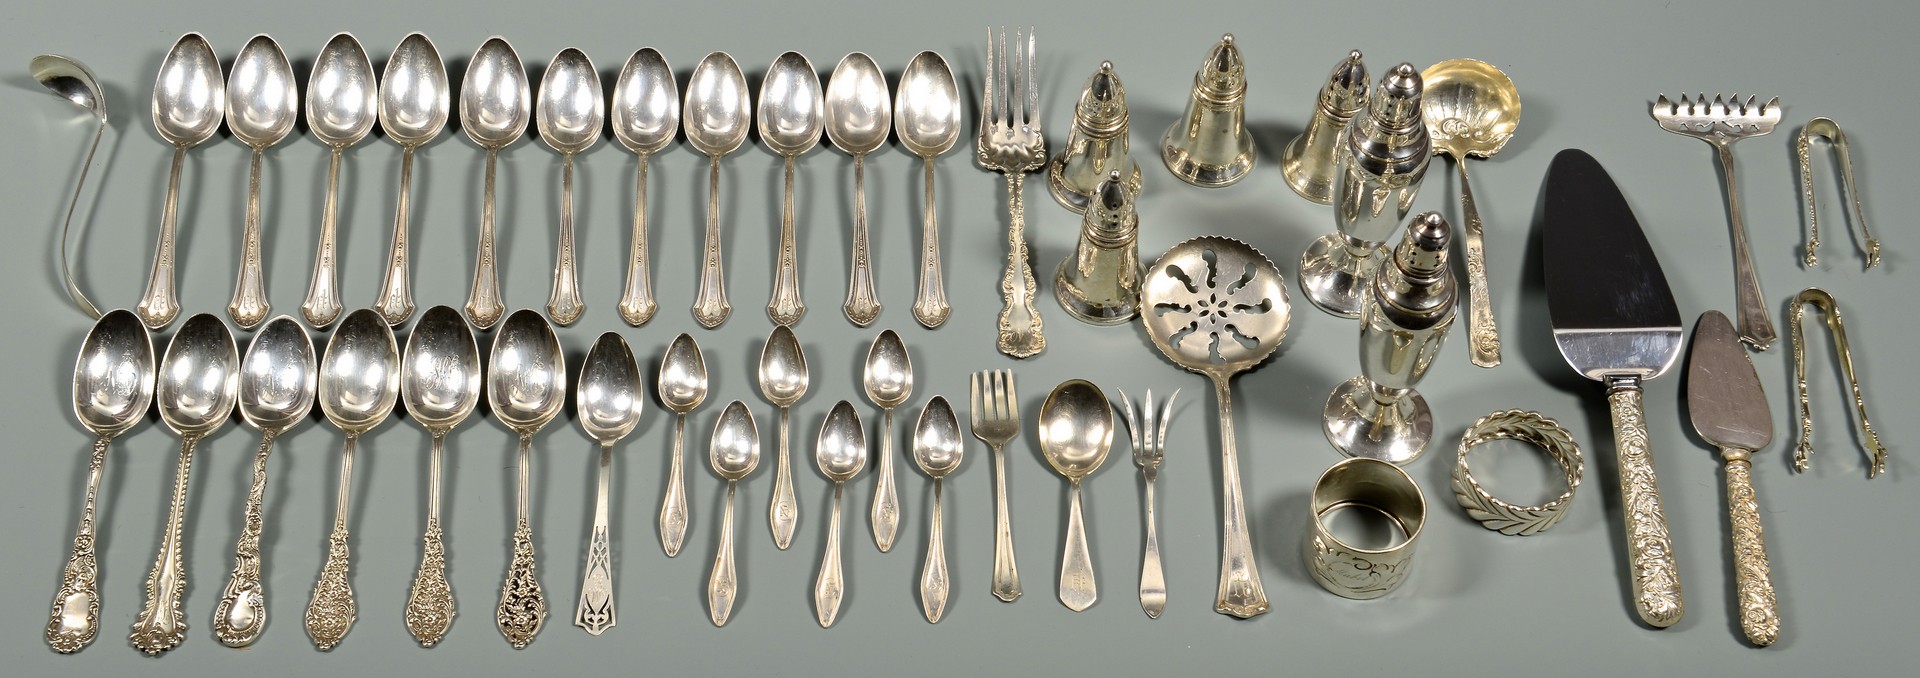 Lot 574: Misc. flatware, napkin rings and salt shakers, 44